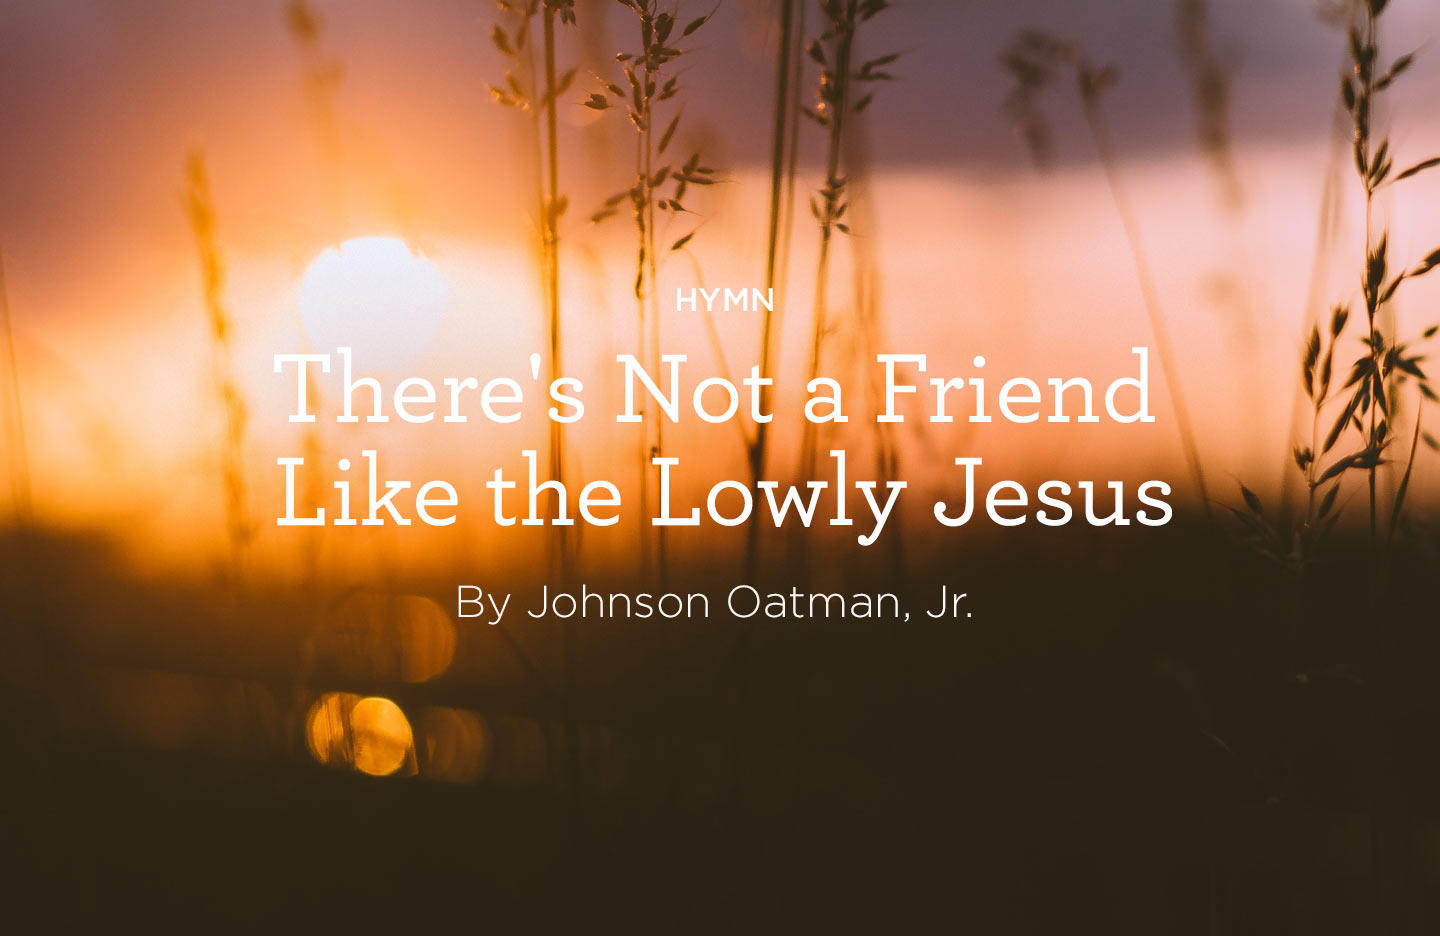 thumbnail image for Hymn: “There’s Not a Friend Like the Lowly Jesus” by Johnson Oatman, Jr